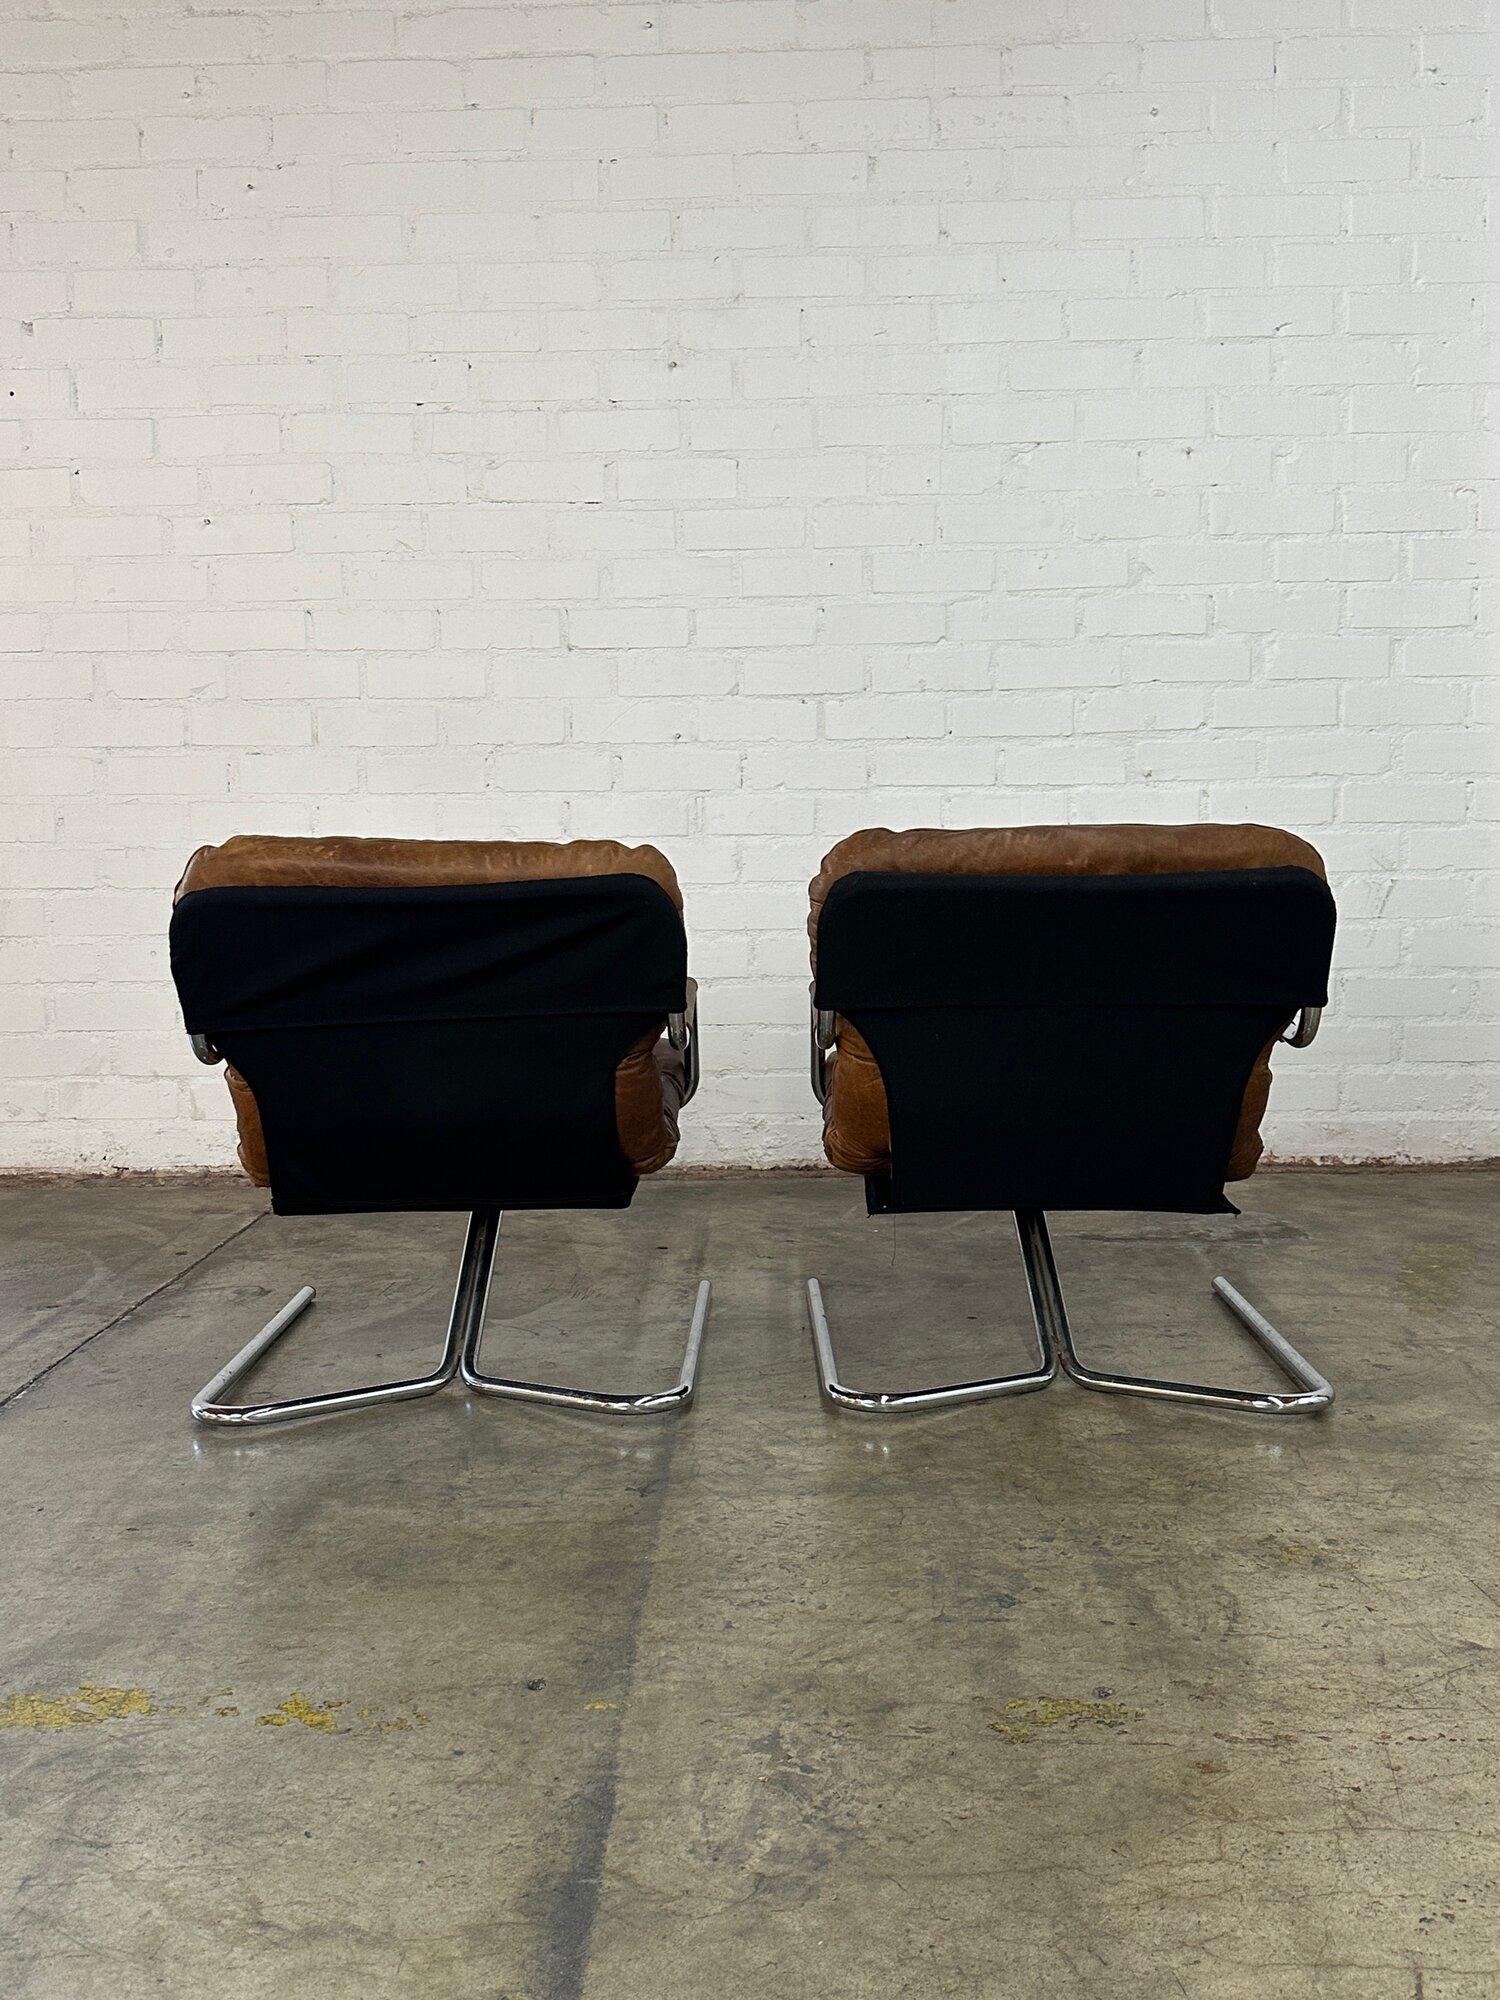 Cantilevered Italian Lounge chairs - sold separately 9